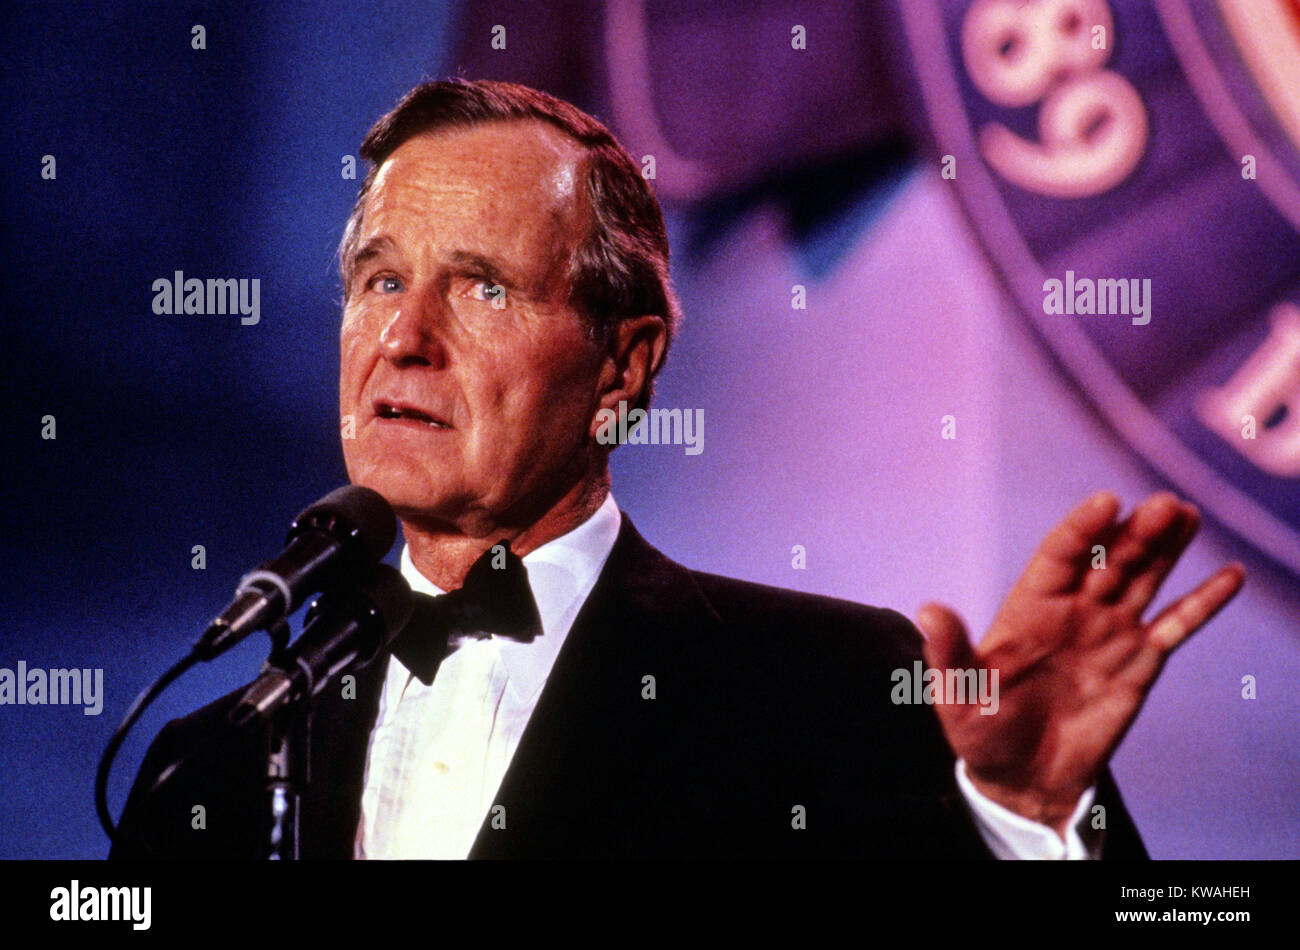 Washington, District of Columbia, USA. 20th Jan, 1989. United States President George H.W. Bush makes remarks at an Inaugural Ball on Inauguration Day, January 20, 1989 in Washington, DC.Credit: Pam Price/Pool via CNP Credit: Pam Price/CNP/ZUMA Wire/Alamy Live News Stock Photo